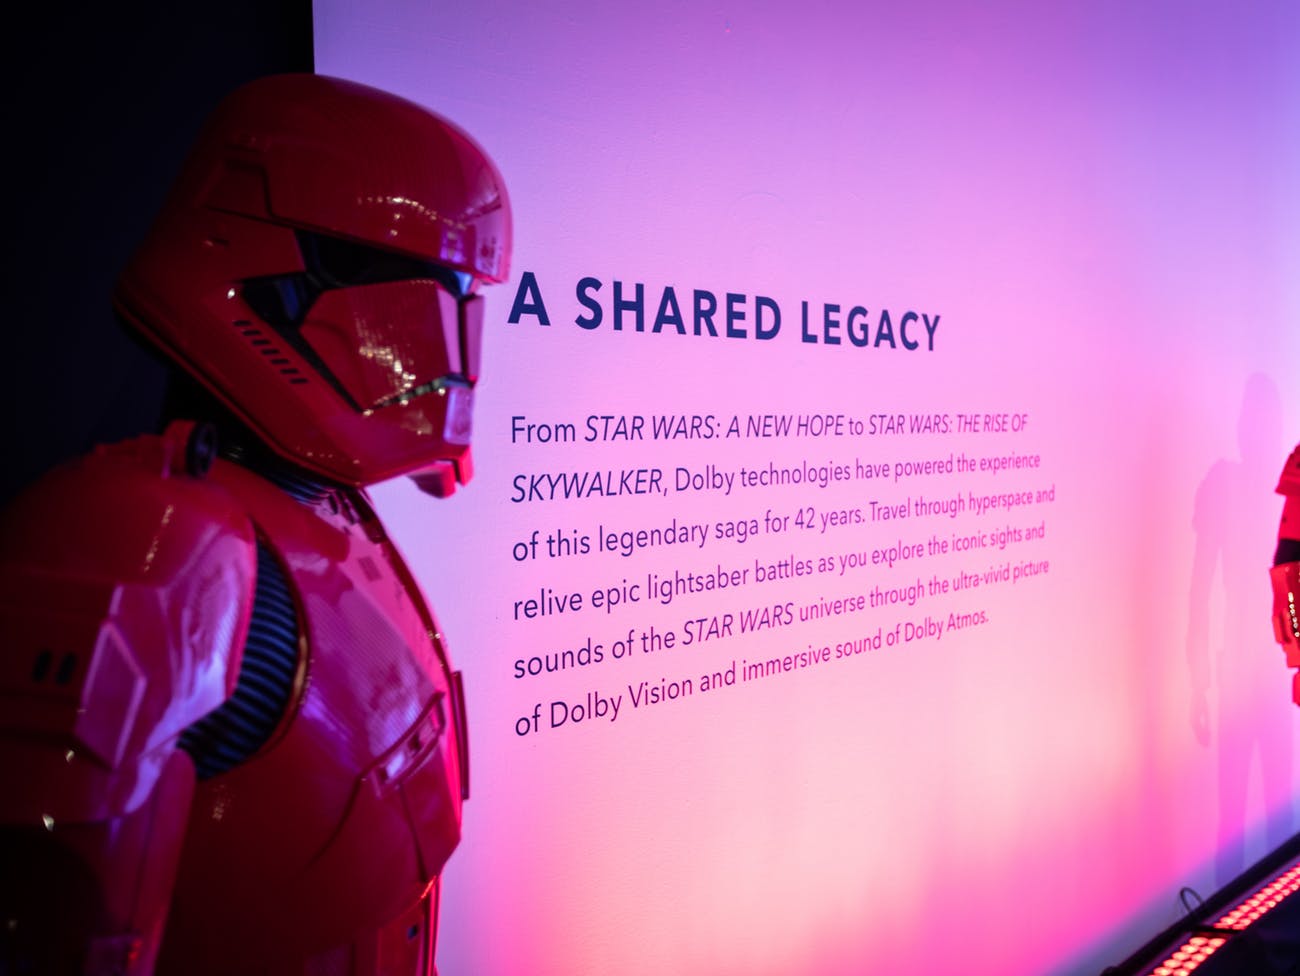 Star Wars in Mostra a New York